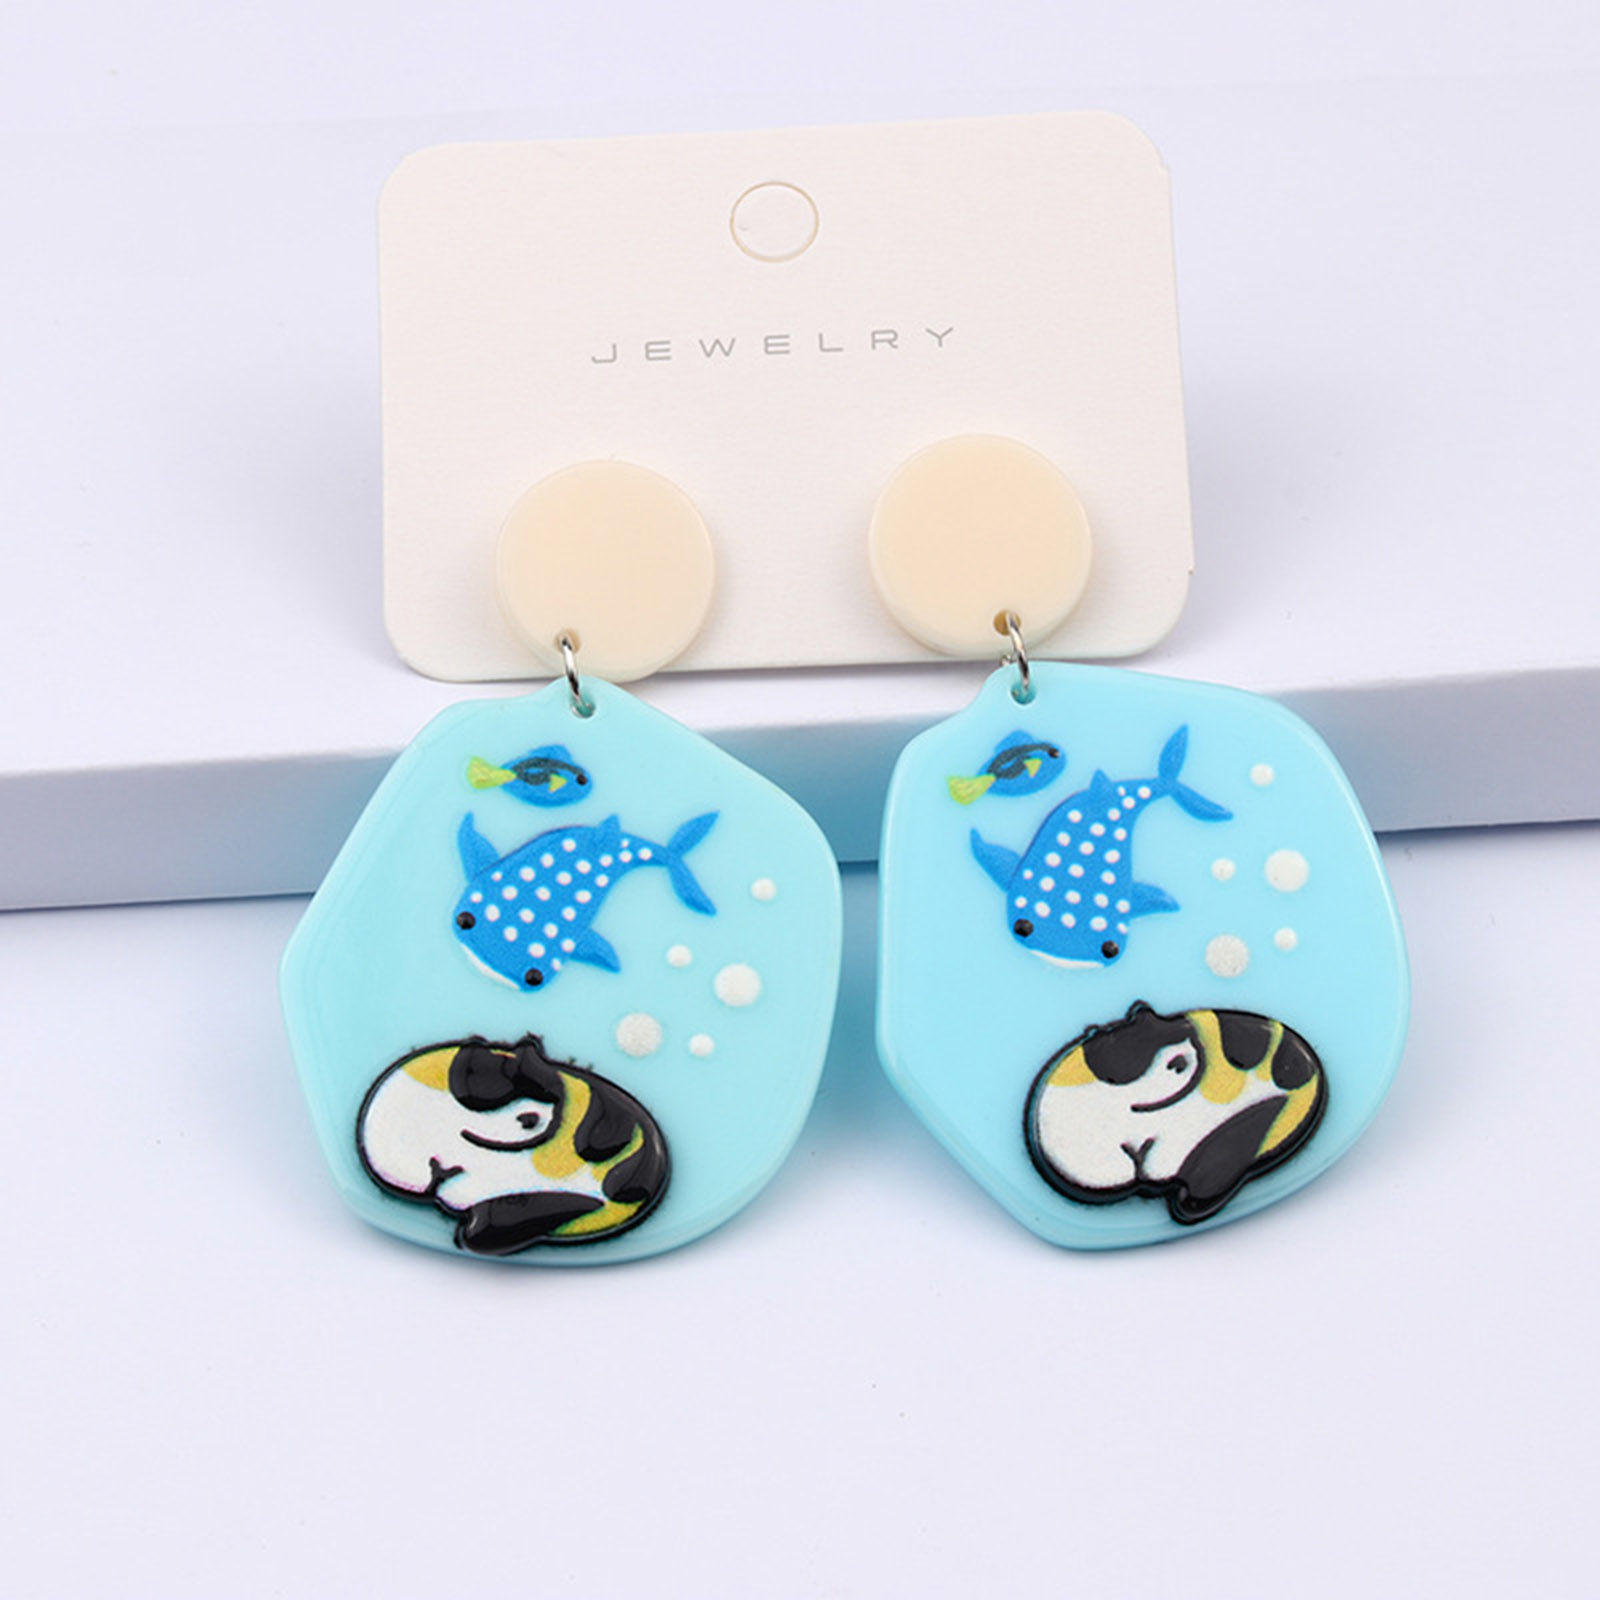 Picture of Acrylic Cute Ear Post Stud Earrings Silver Tone Blue Polygon Cat 6cm x 3cm, 1 Pair